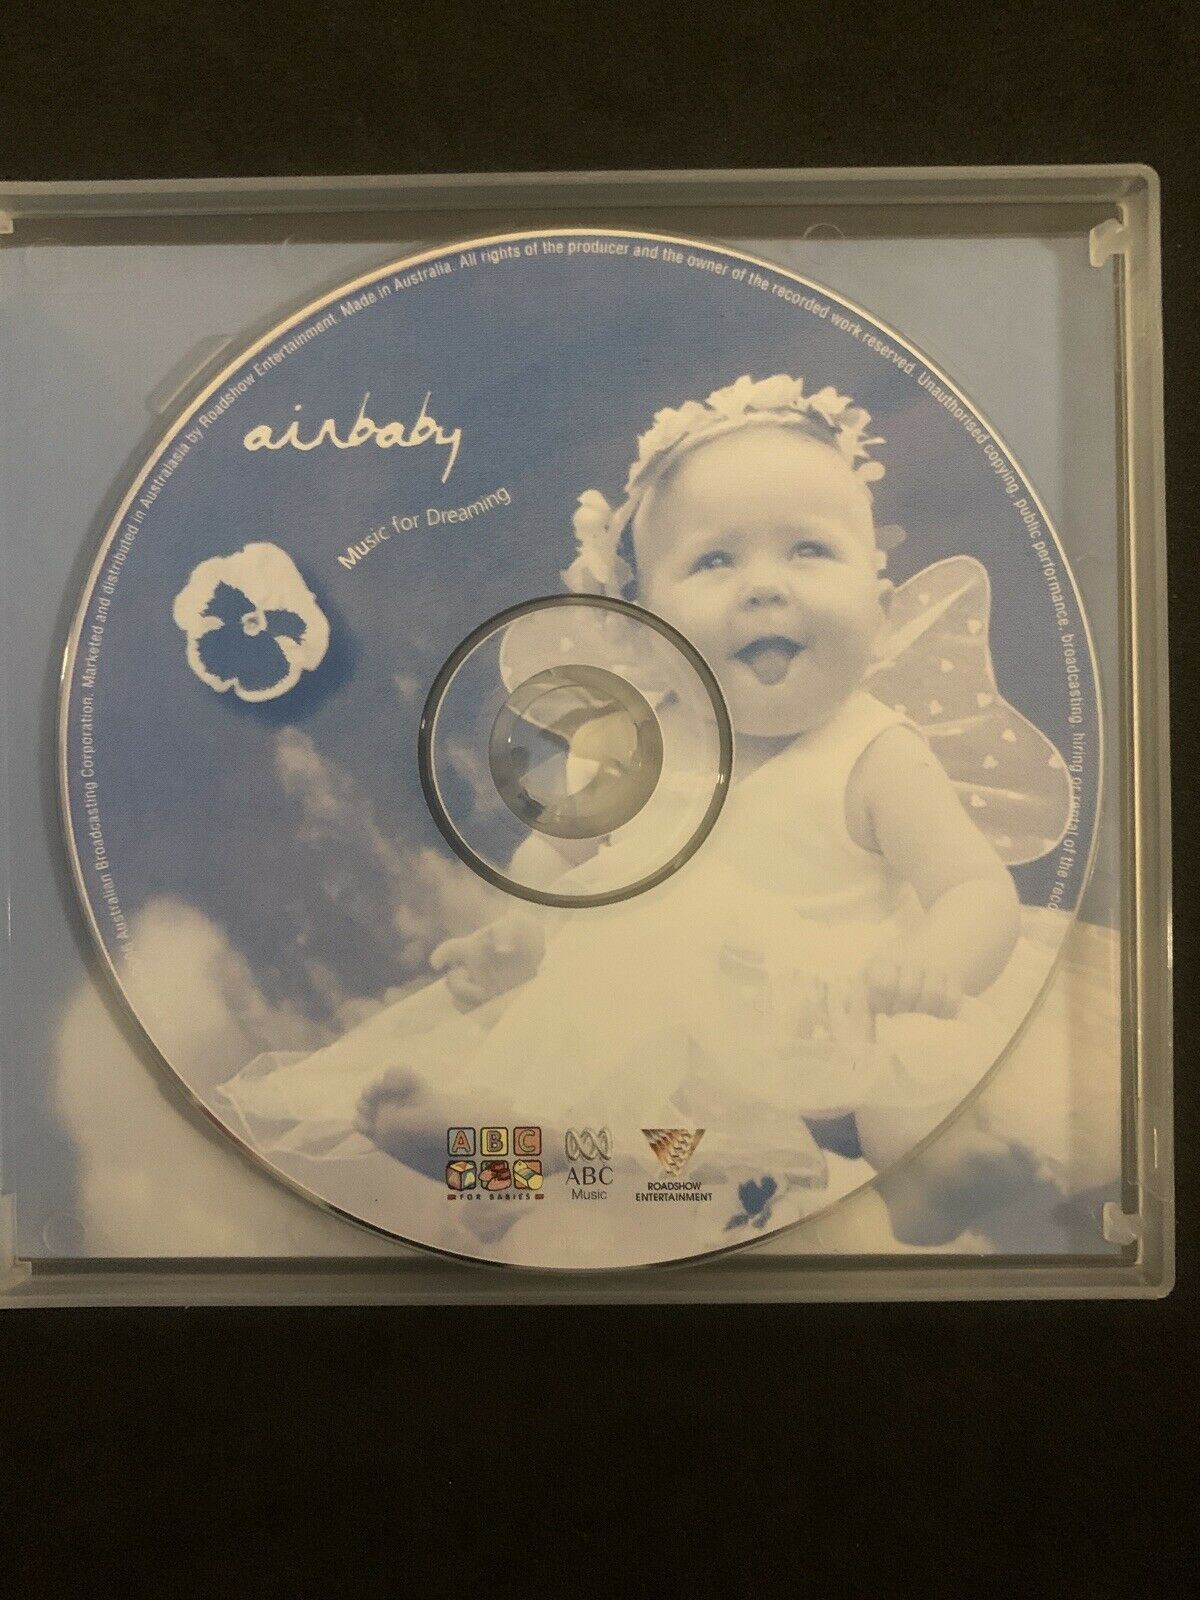 Airbaby - Music For Dreaming (CD) ABC For Babies